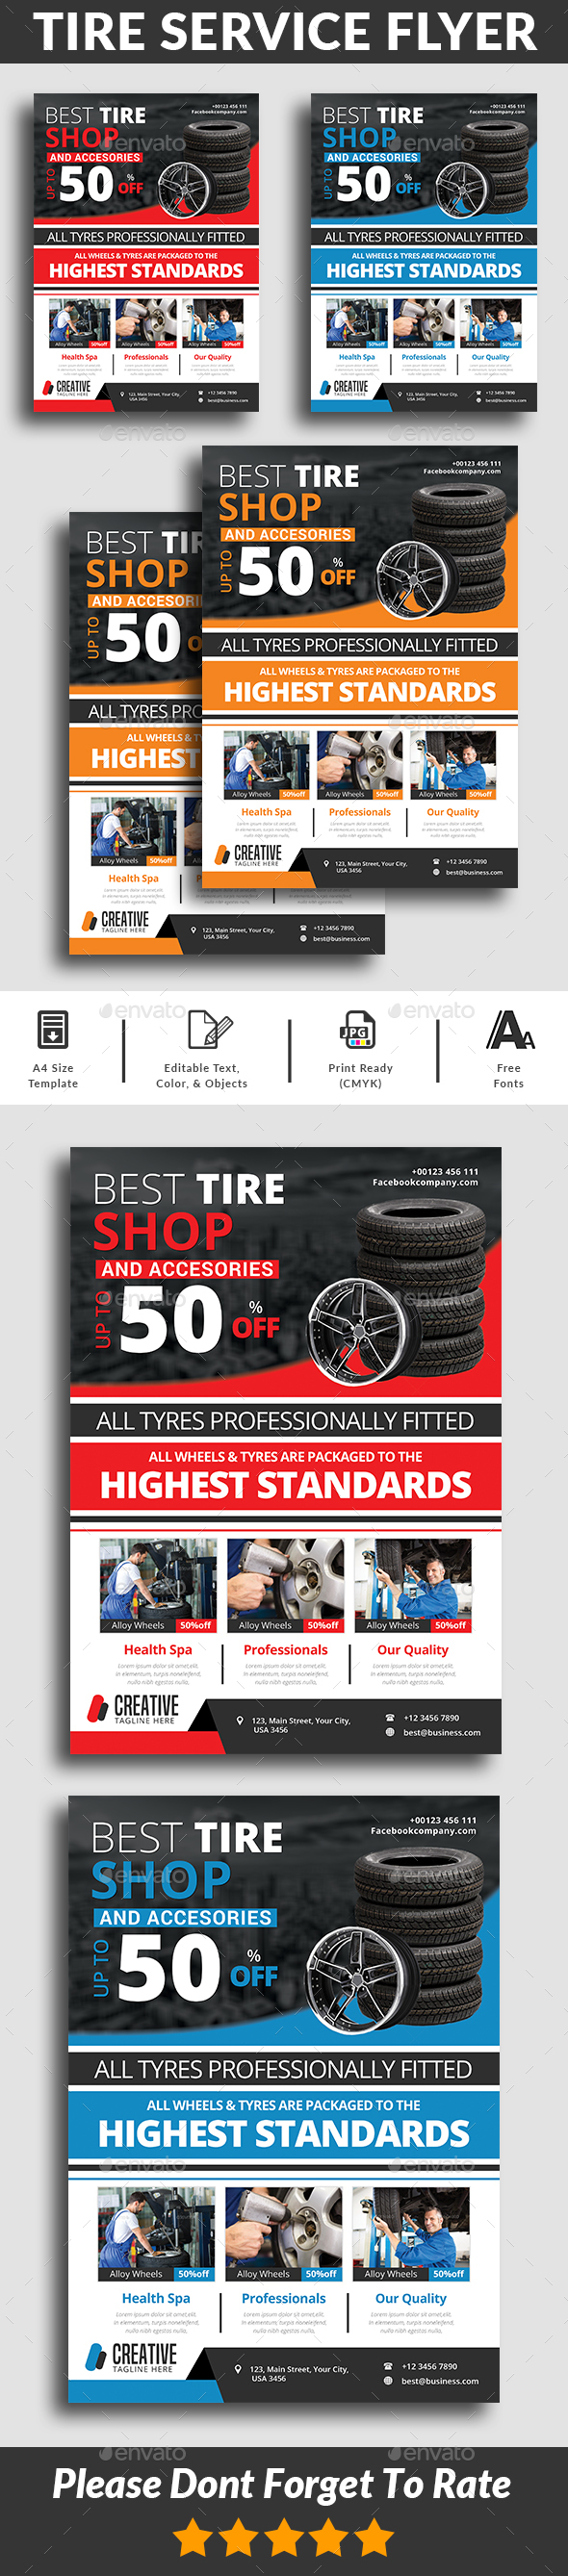 Tires Services Flyer